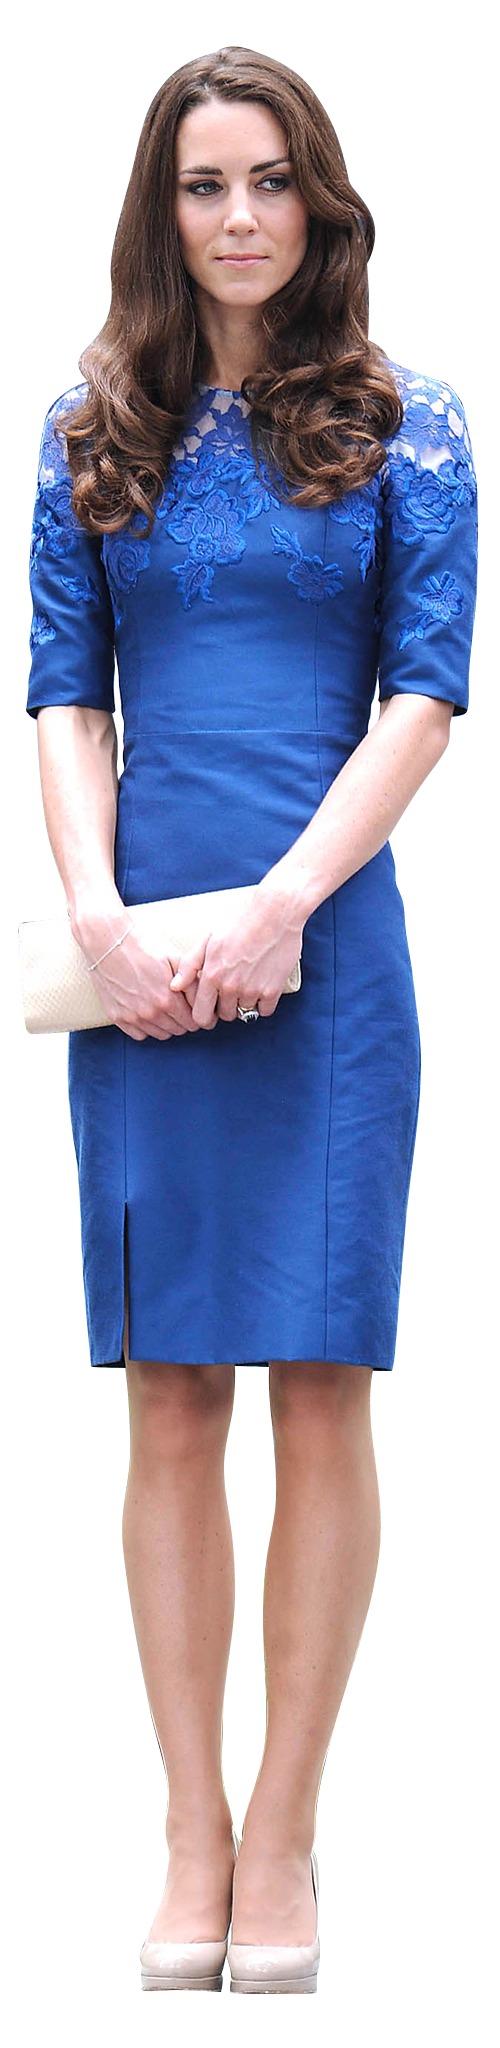 Catherine Middleton PNG Picture